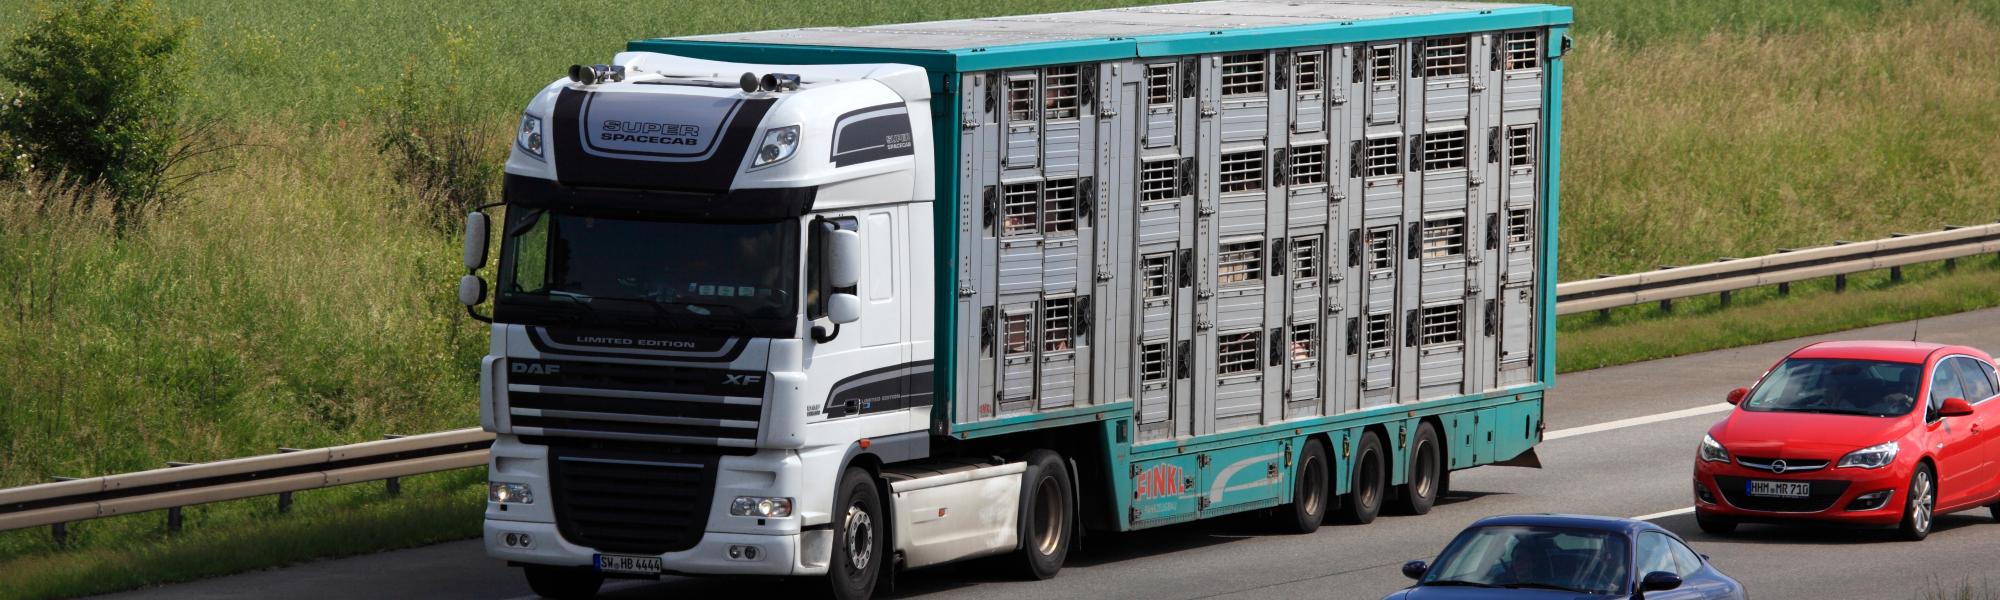 Live animal transport European Commission tables improved conditions